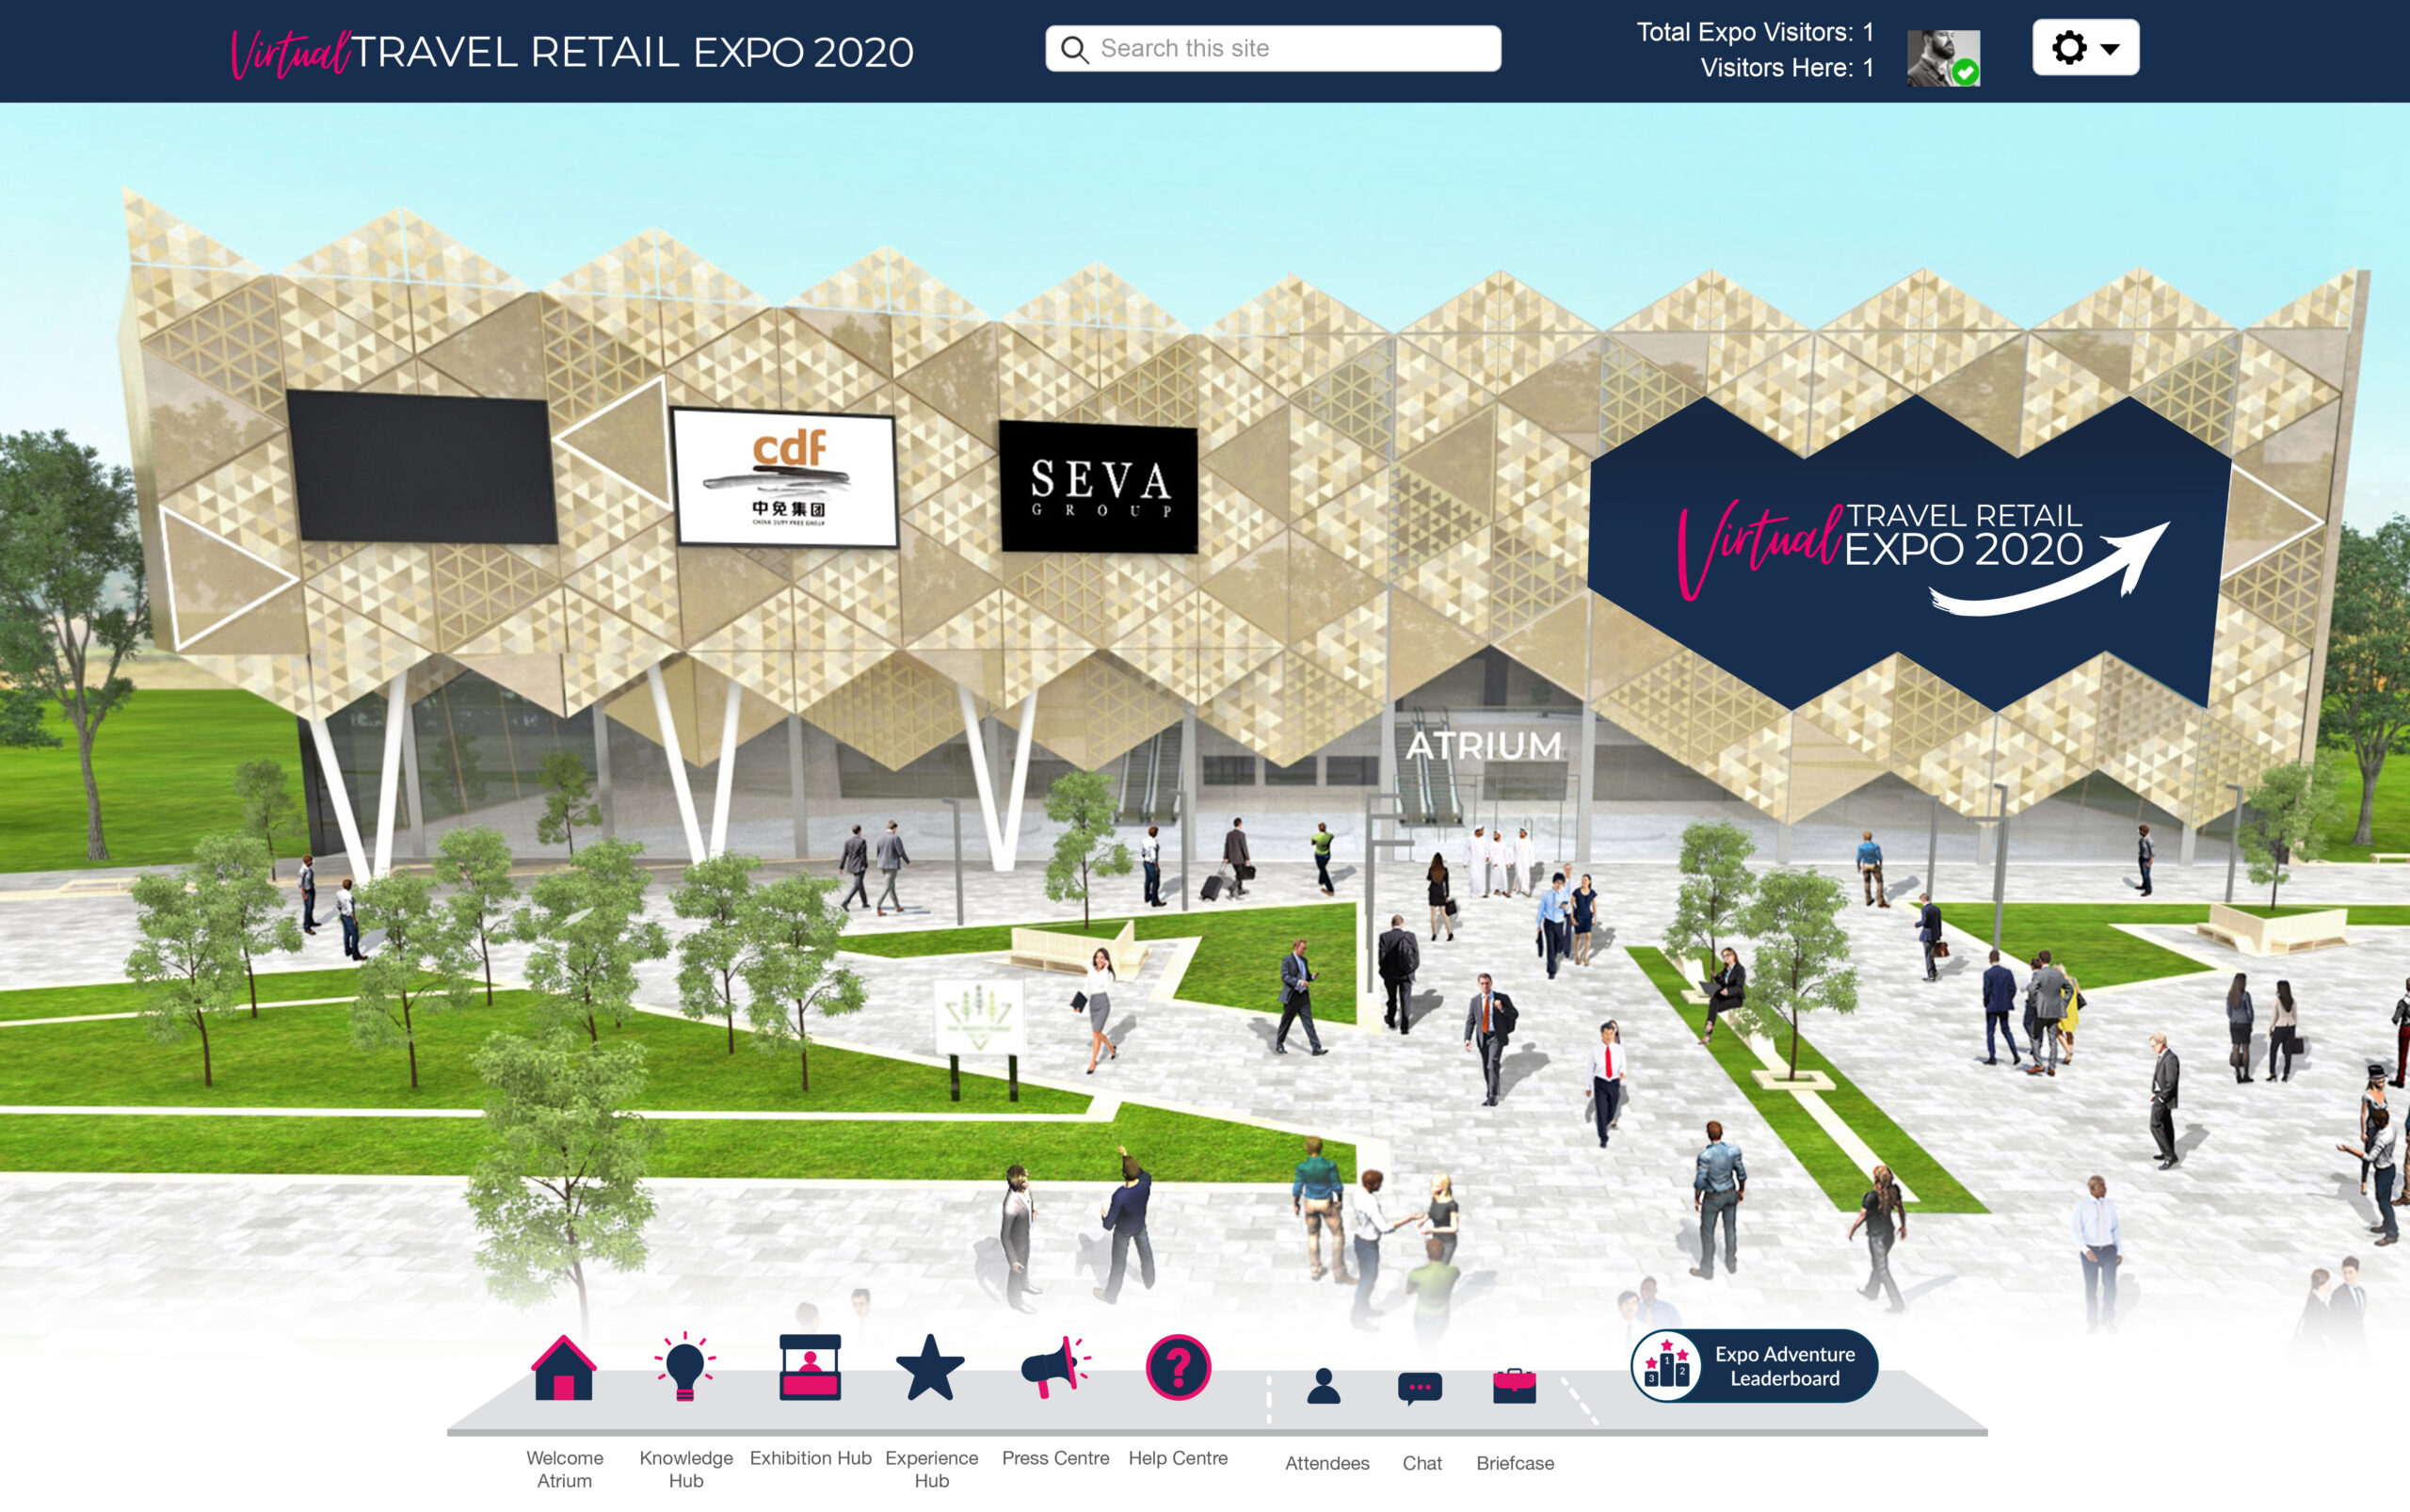 Virtual Travel Retail Expo 2020 by The Moodie Davitt Report trunblocked